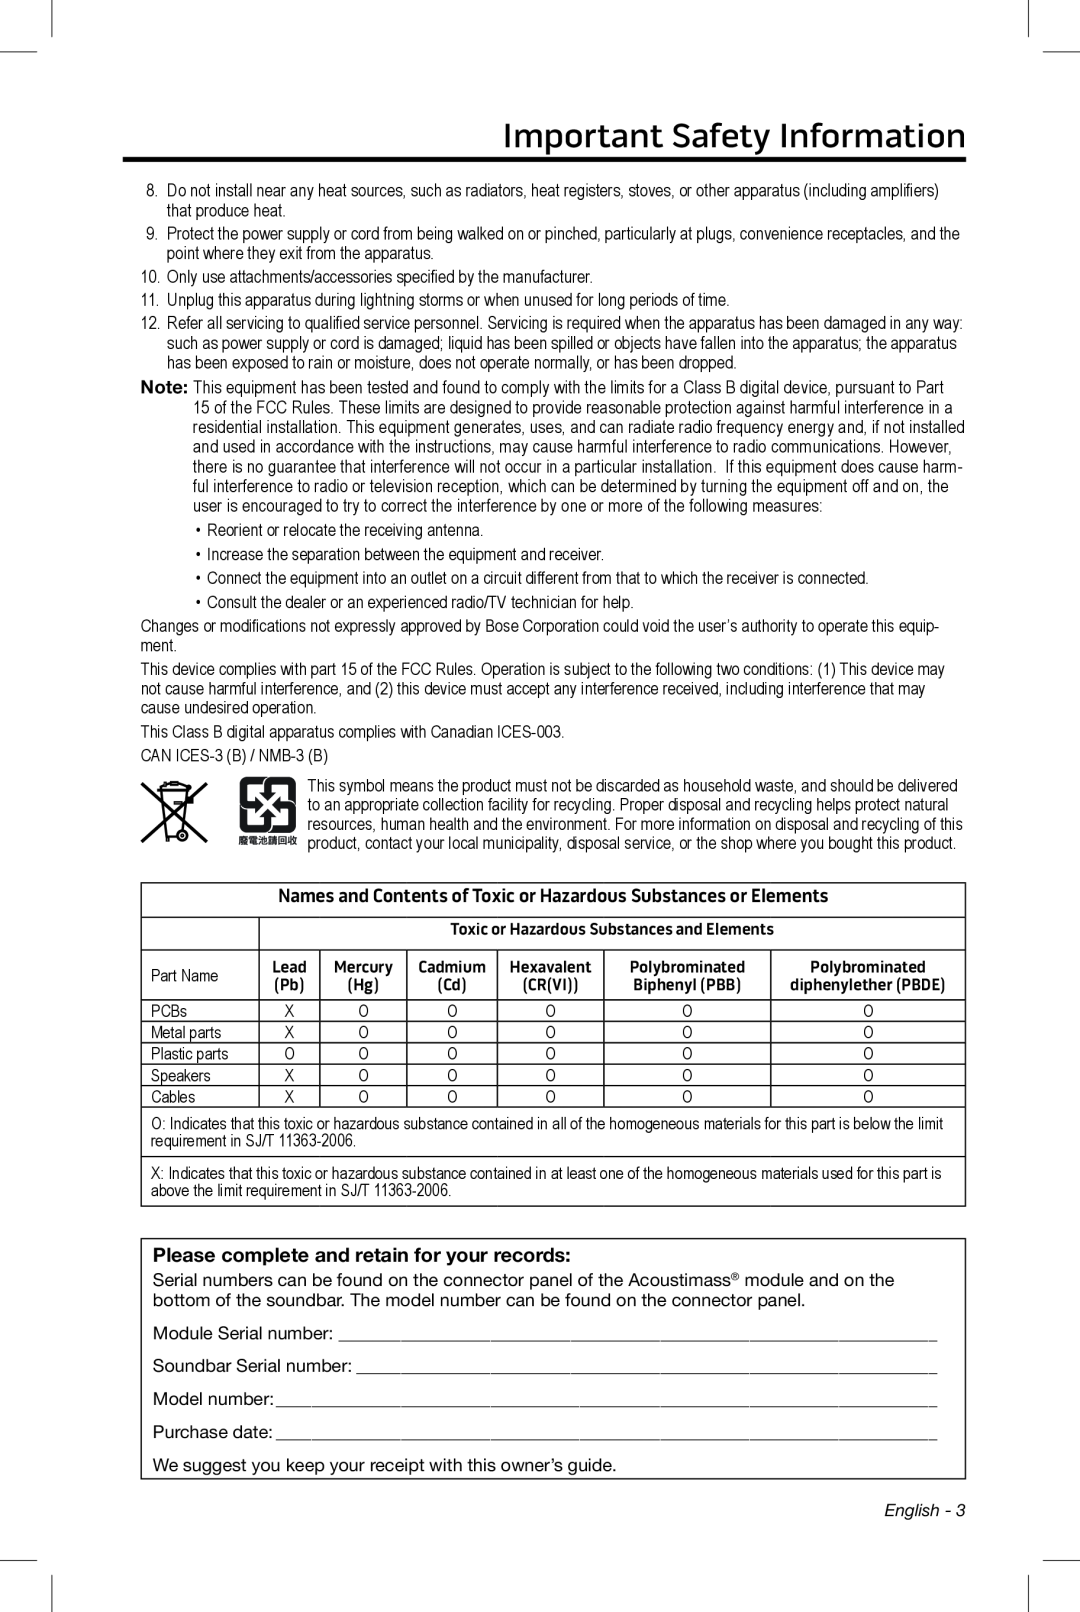 Bose CineMate 15/10 manual Important Safety Information, Please complete and retain for your records 